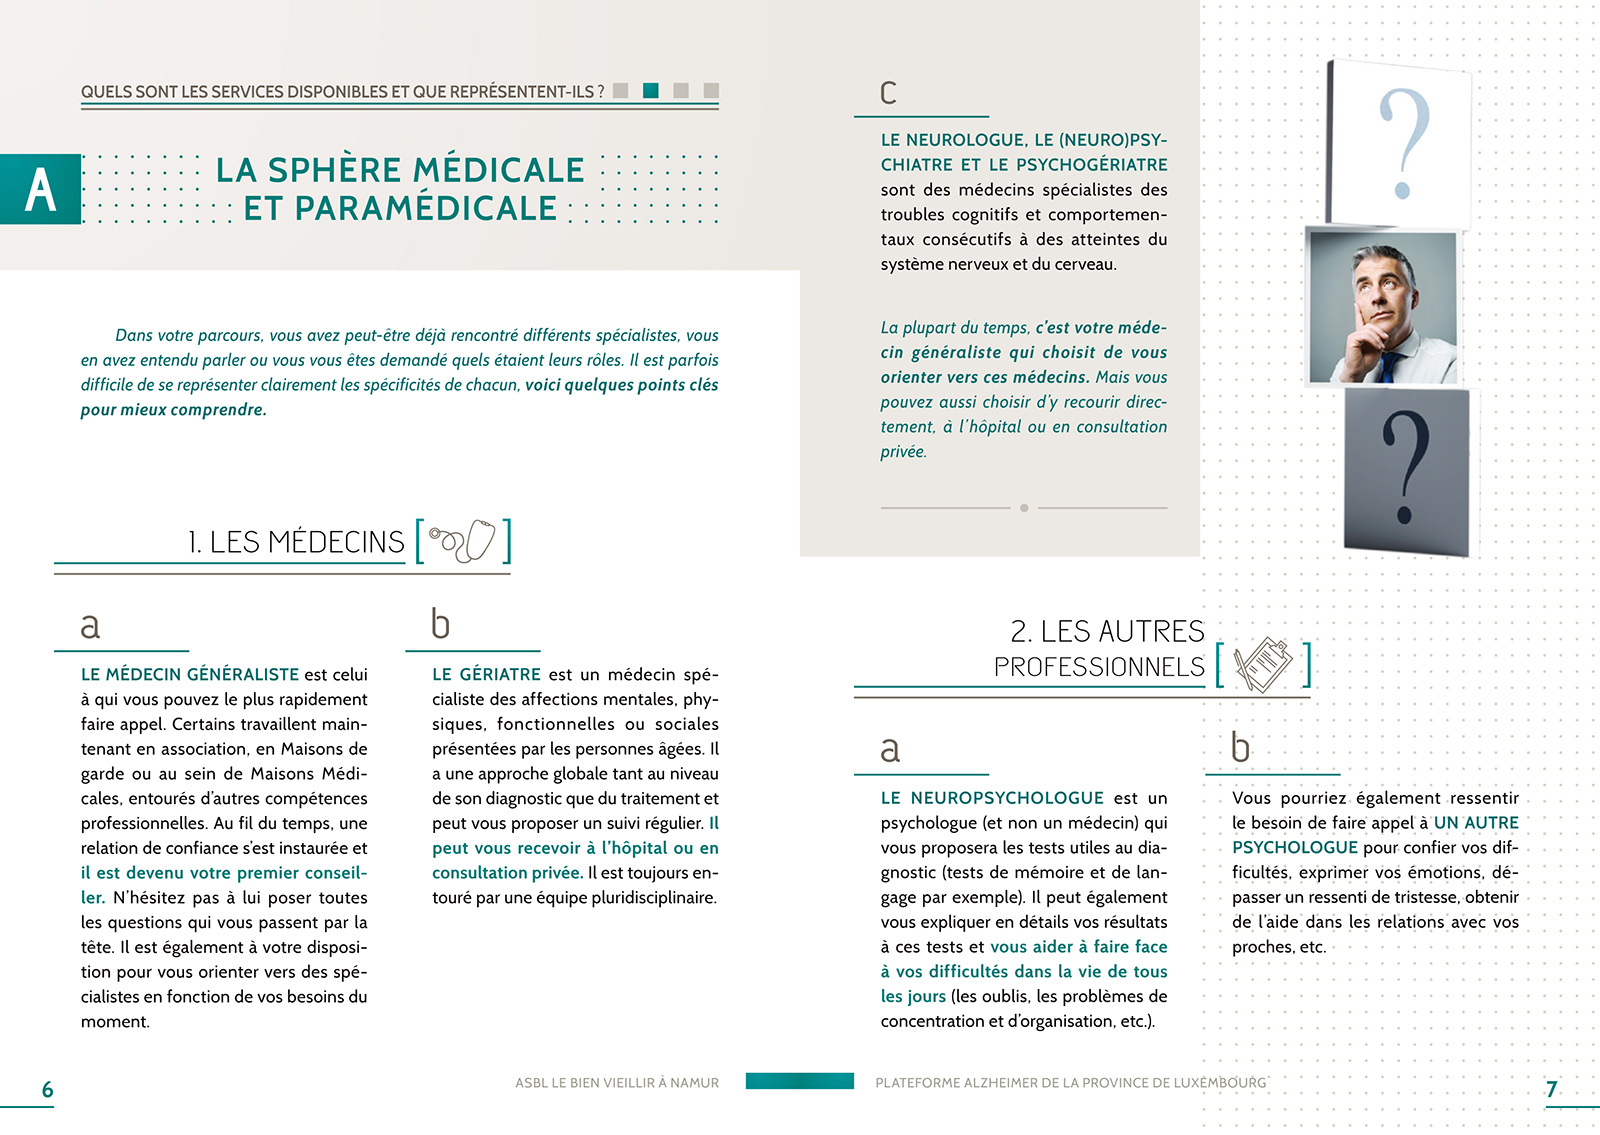 Page about medical and paramedical about Alzheimer's disease